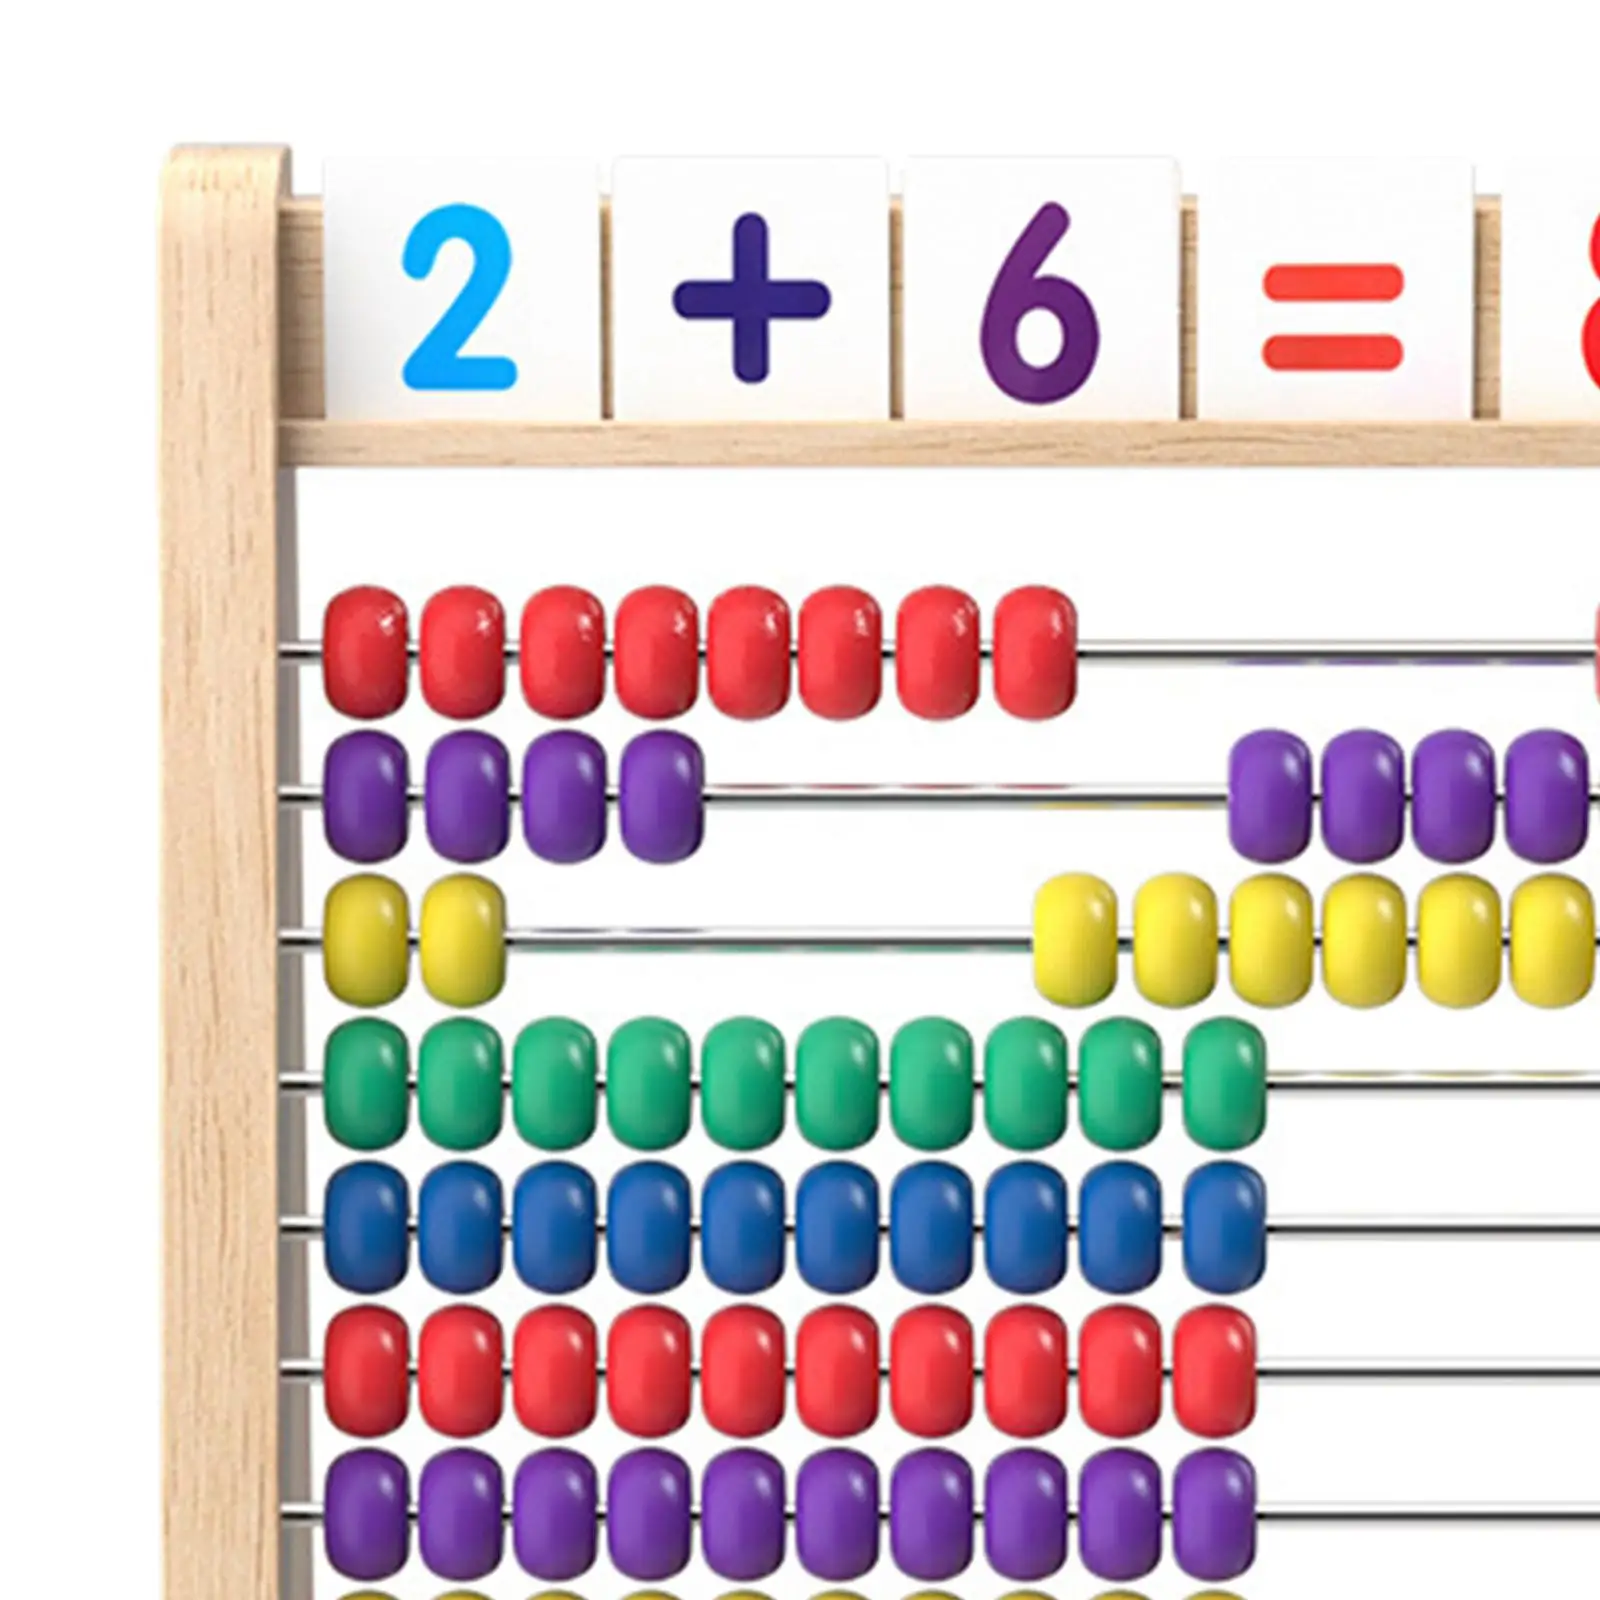 Wooden Abacus 10 Row Educational Counting Toy for Early Development Learning